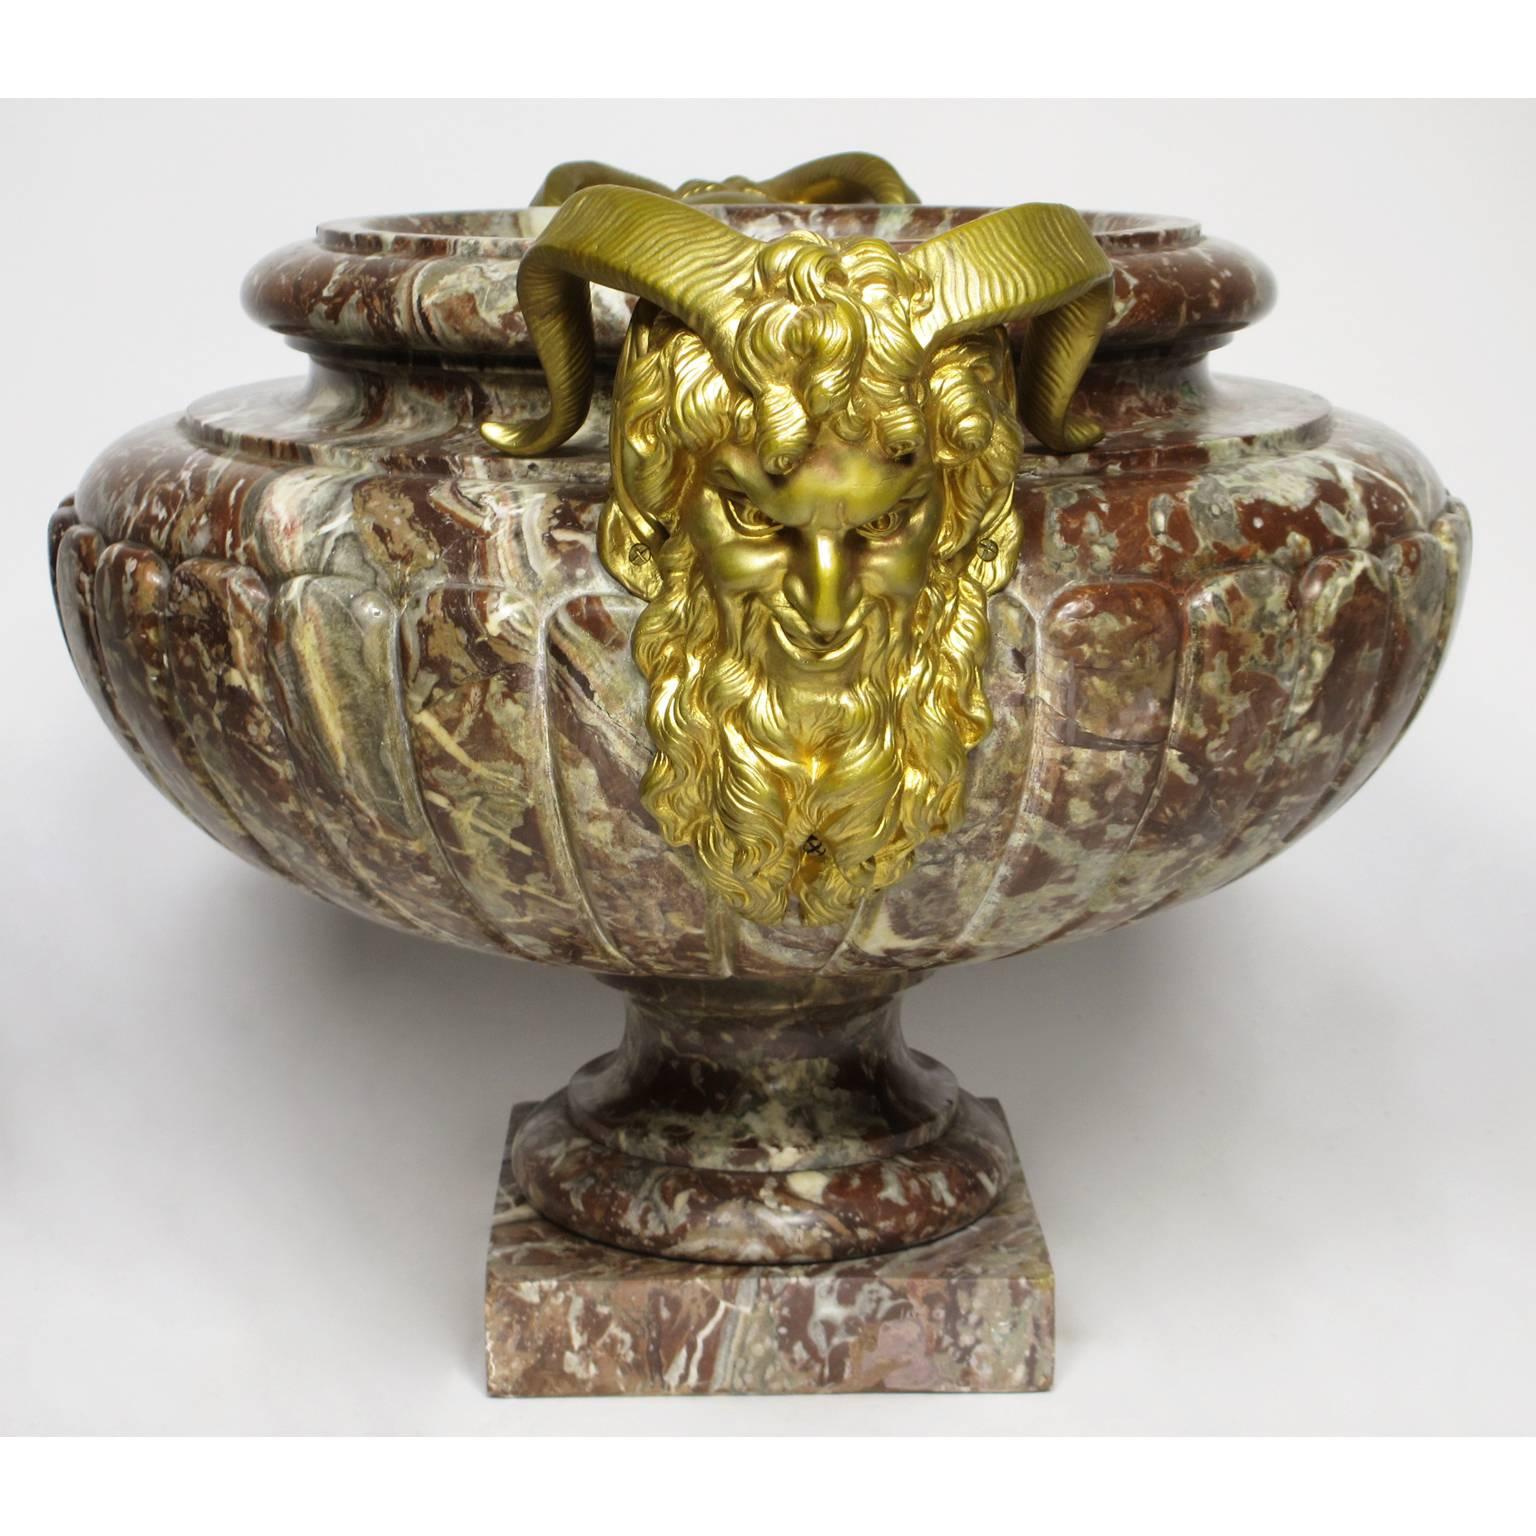 Carved French 19th Century Louis XV Style Marble and Gilt Bronze-Mounted Planter-Urn